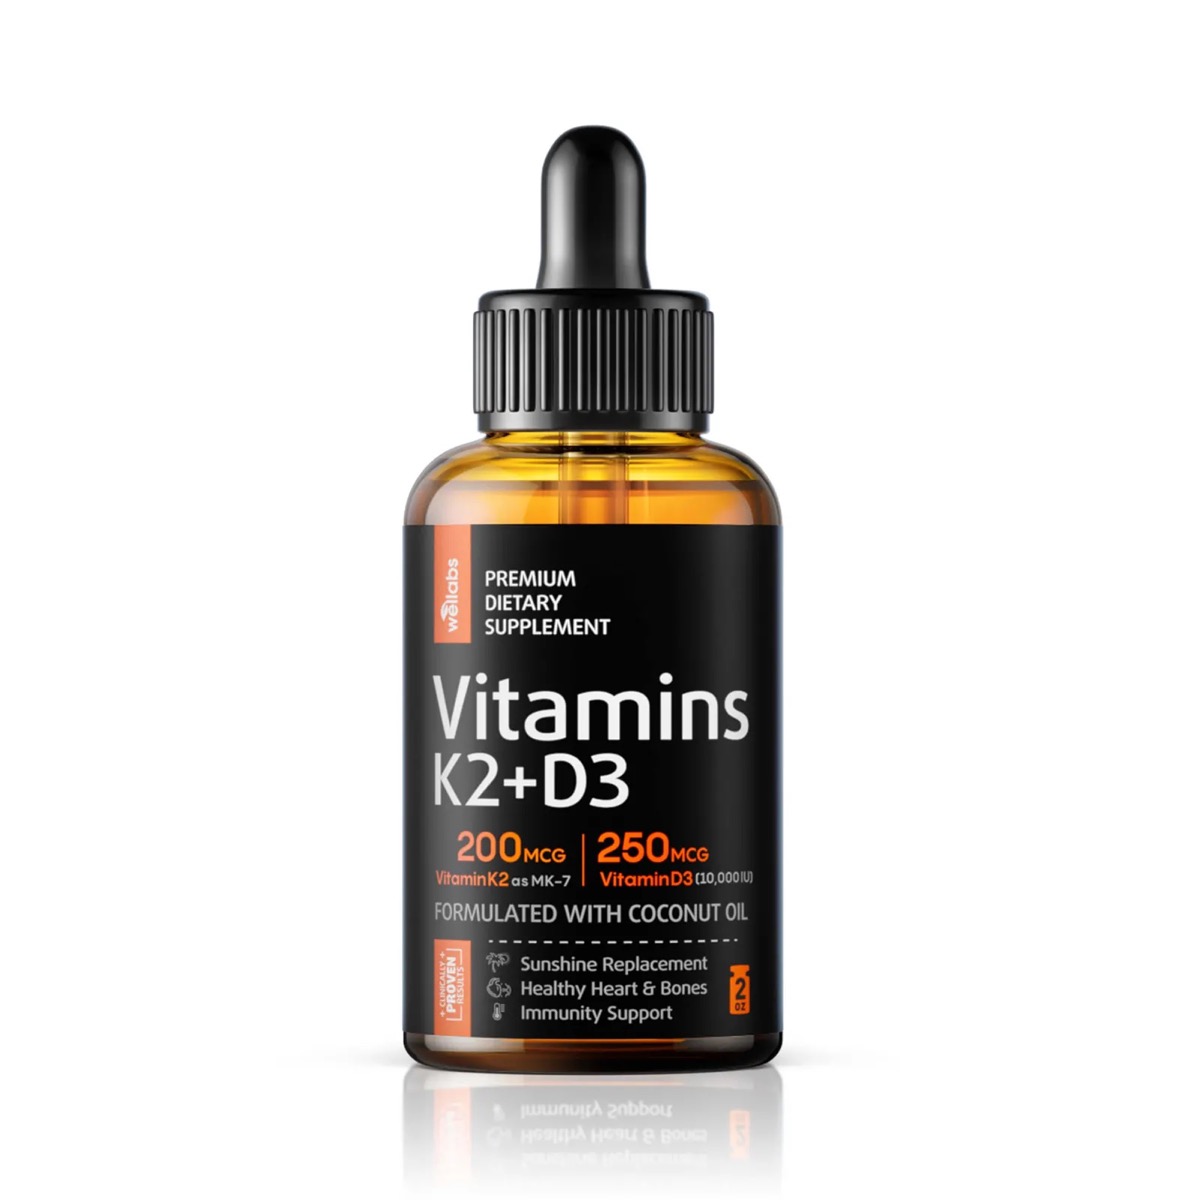 amber colored bottle of wellabs vitamins k2+d3 on white background